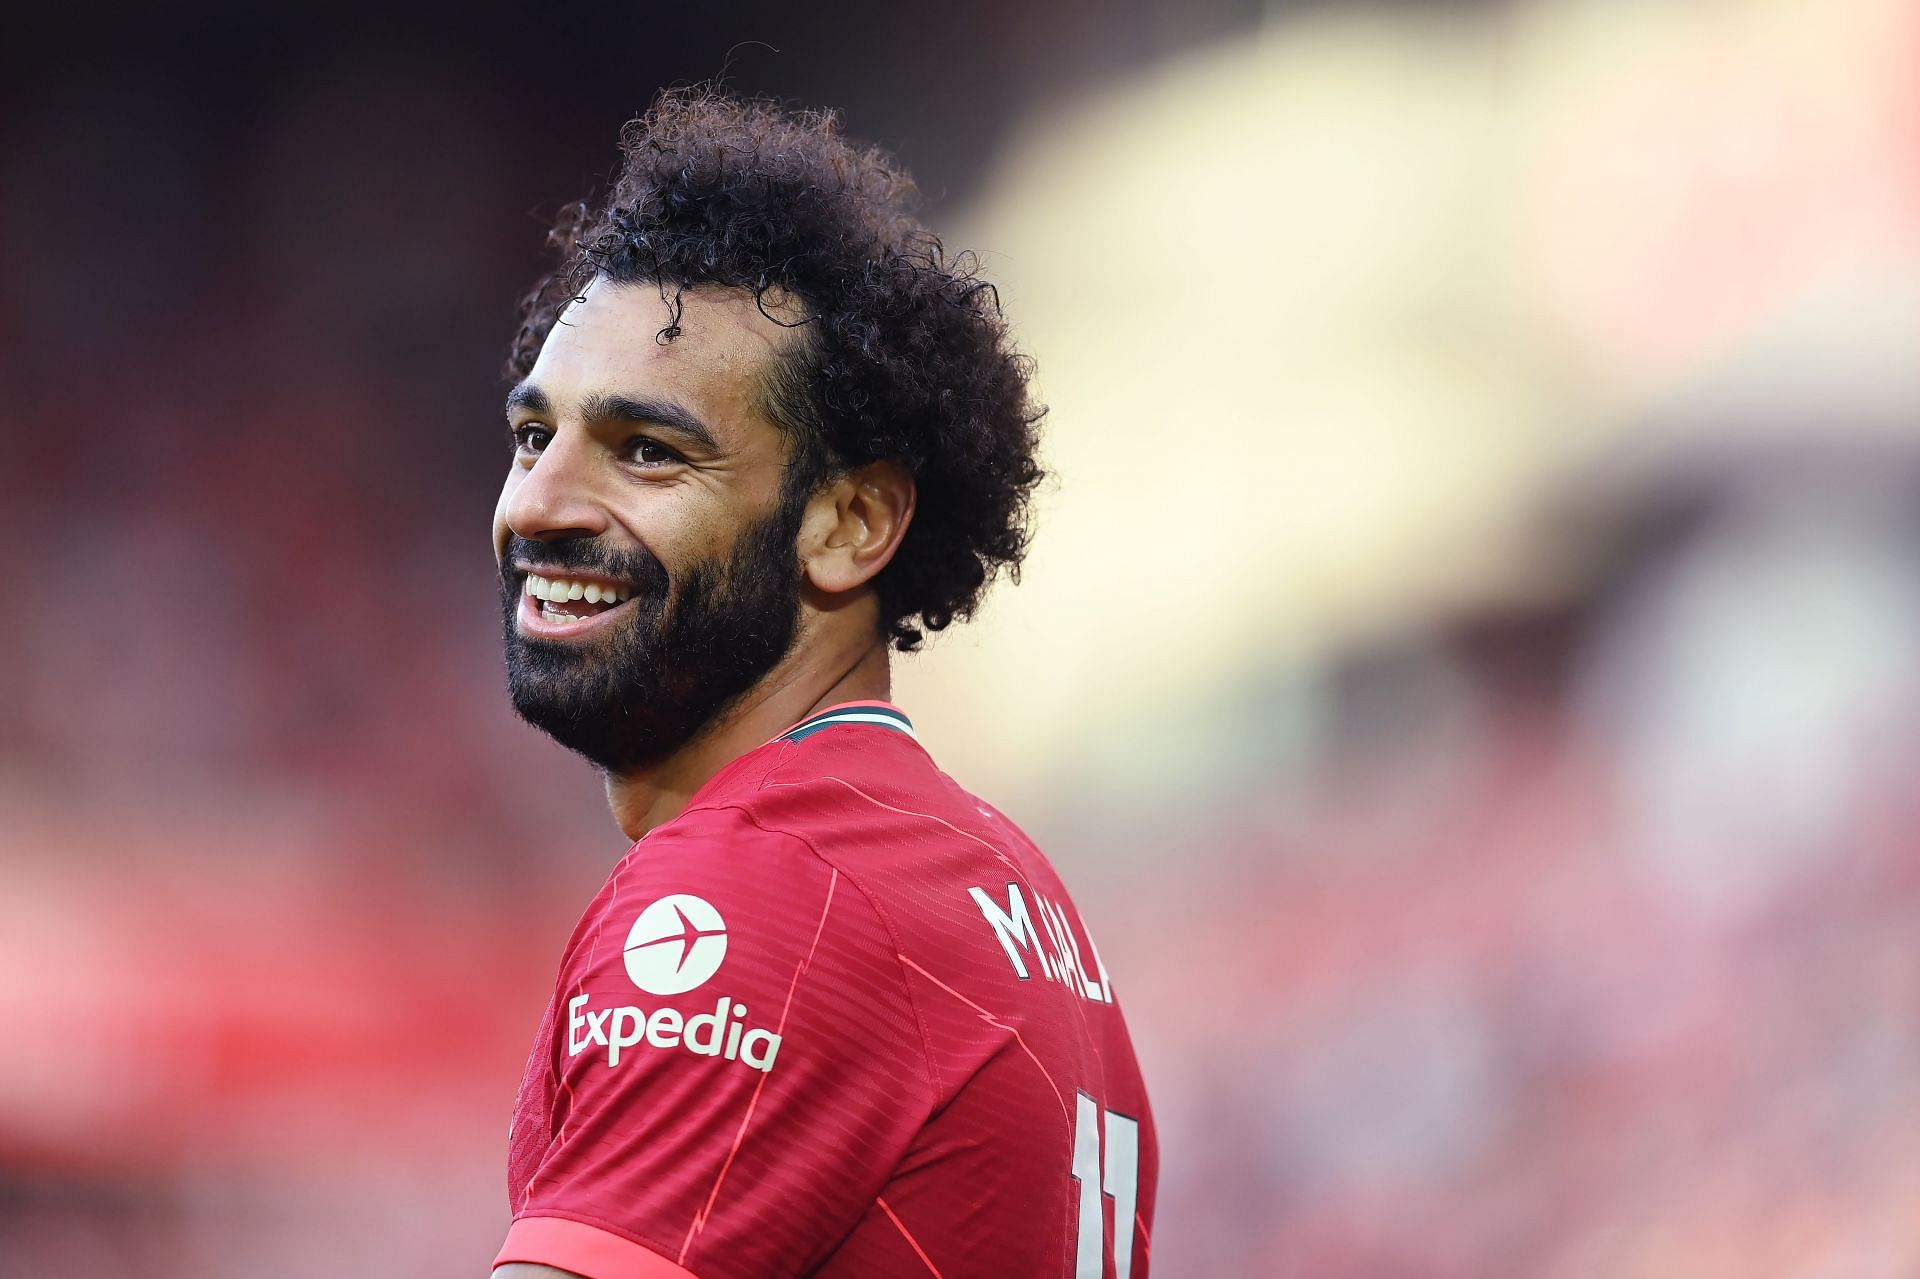 Mohamed Salah is currently among the most talented players in Europe